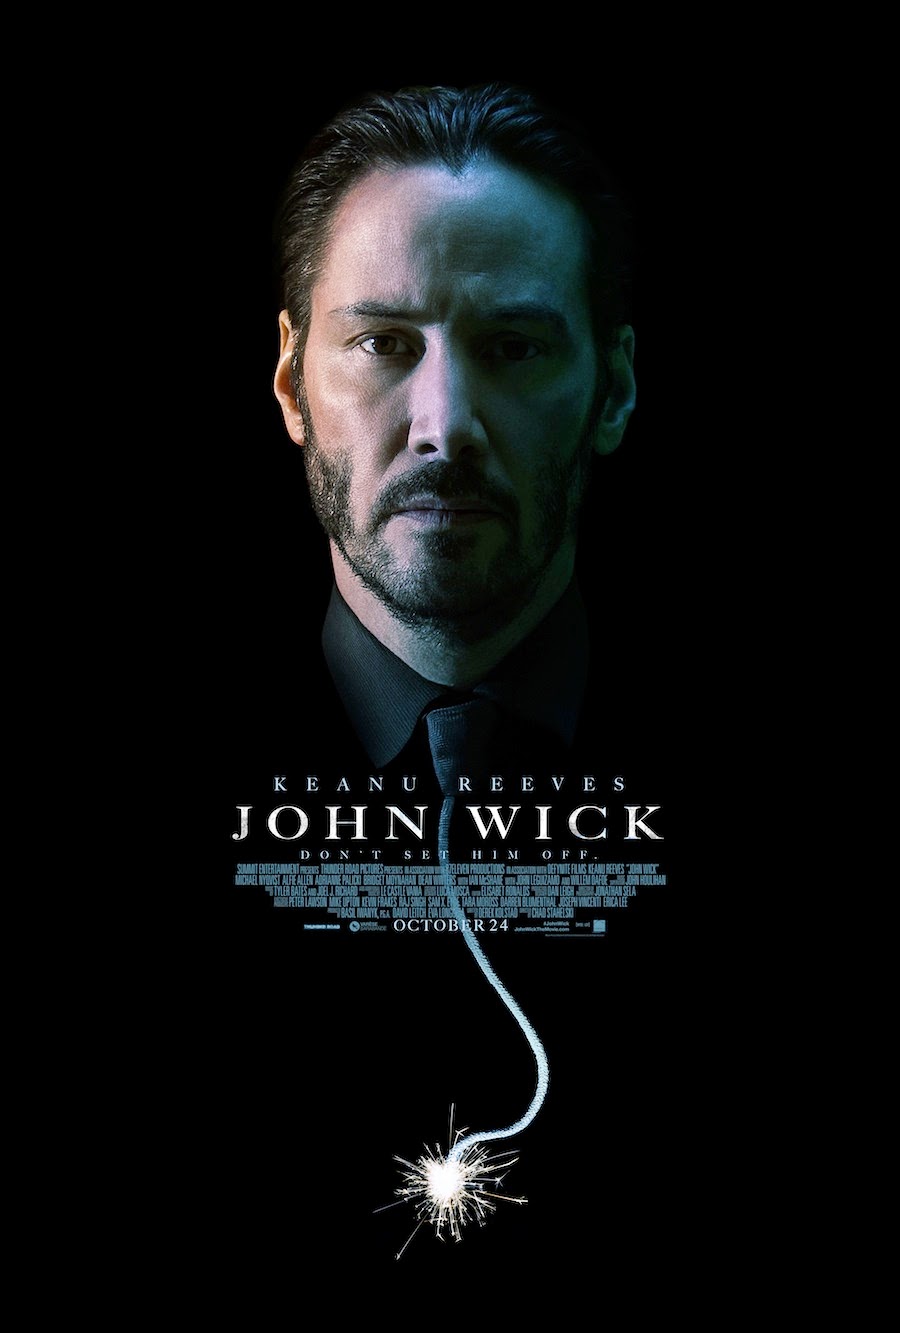 THE FINE ART DINER: Specialized Waste Disposal: John Wick